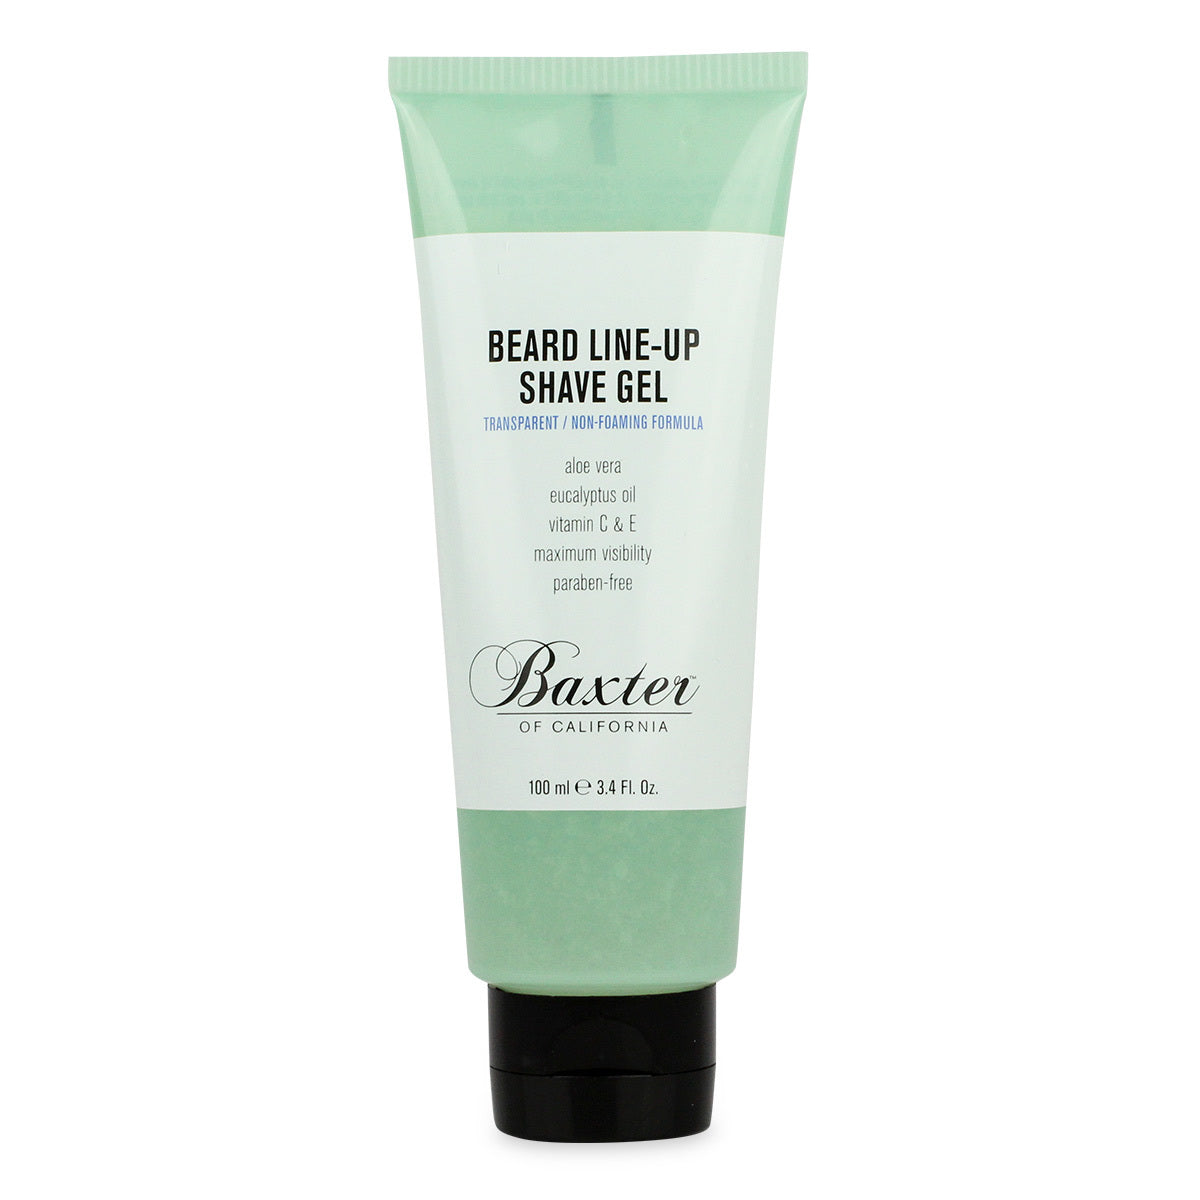 Primary image of Beard Line-Up Shave Gel